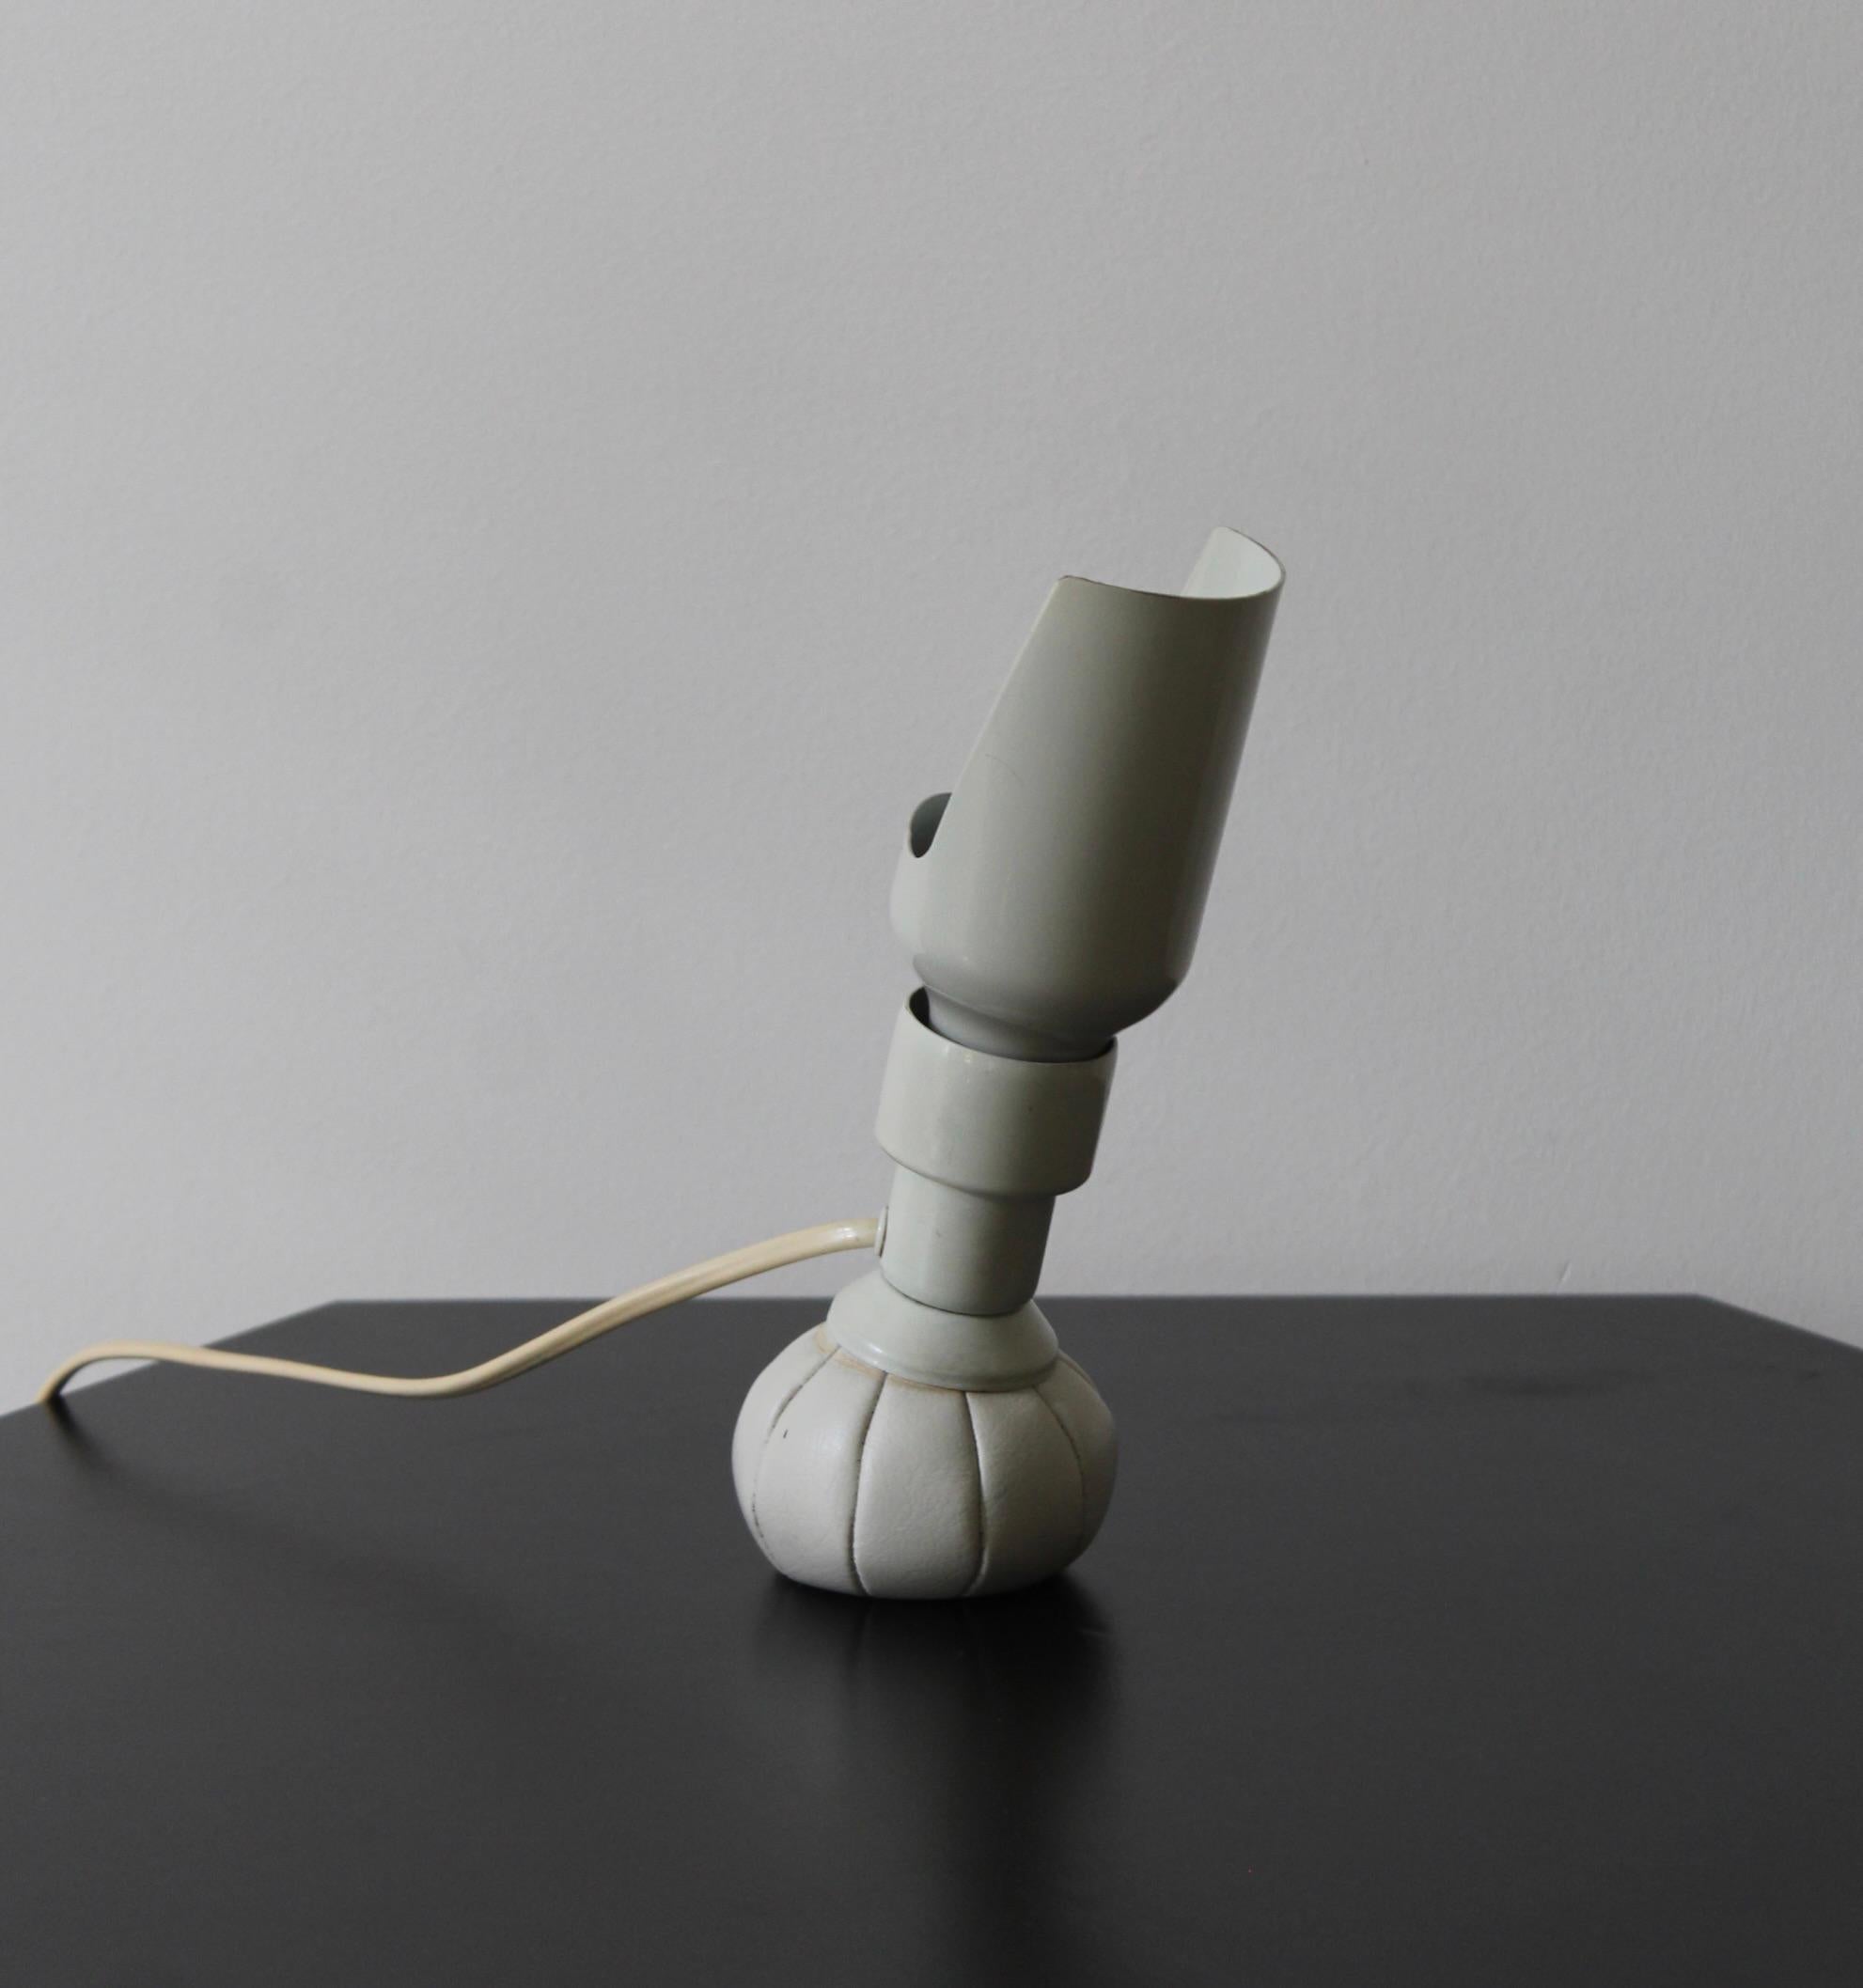 An adjustable table lamp, designed and produced by Gino Sarfatti for Arteluce, Italy, 1966.

White-lacquered metal socket is mounted on the base in form of a leather pouch filled with sand.